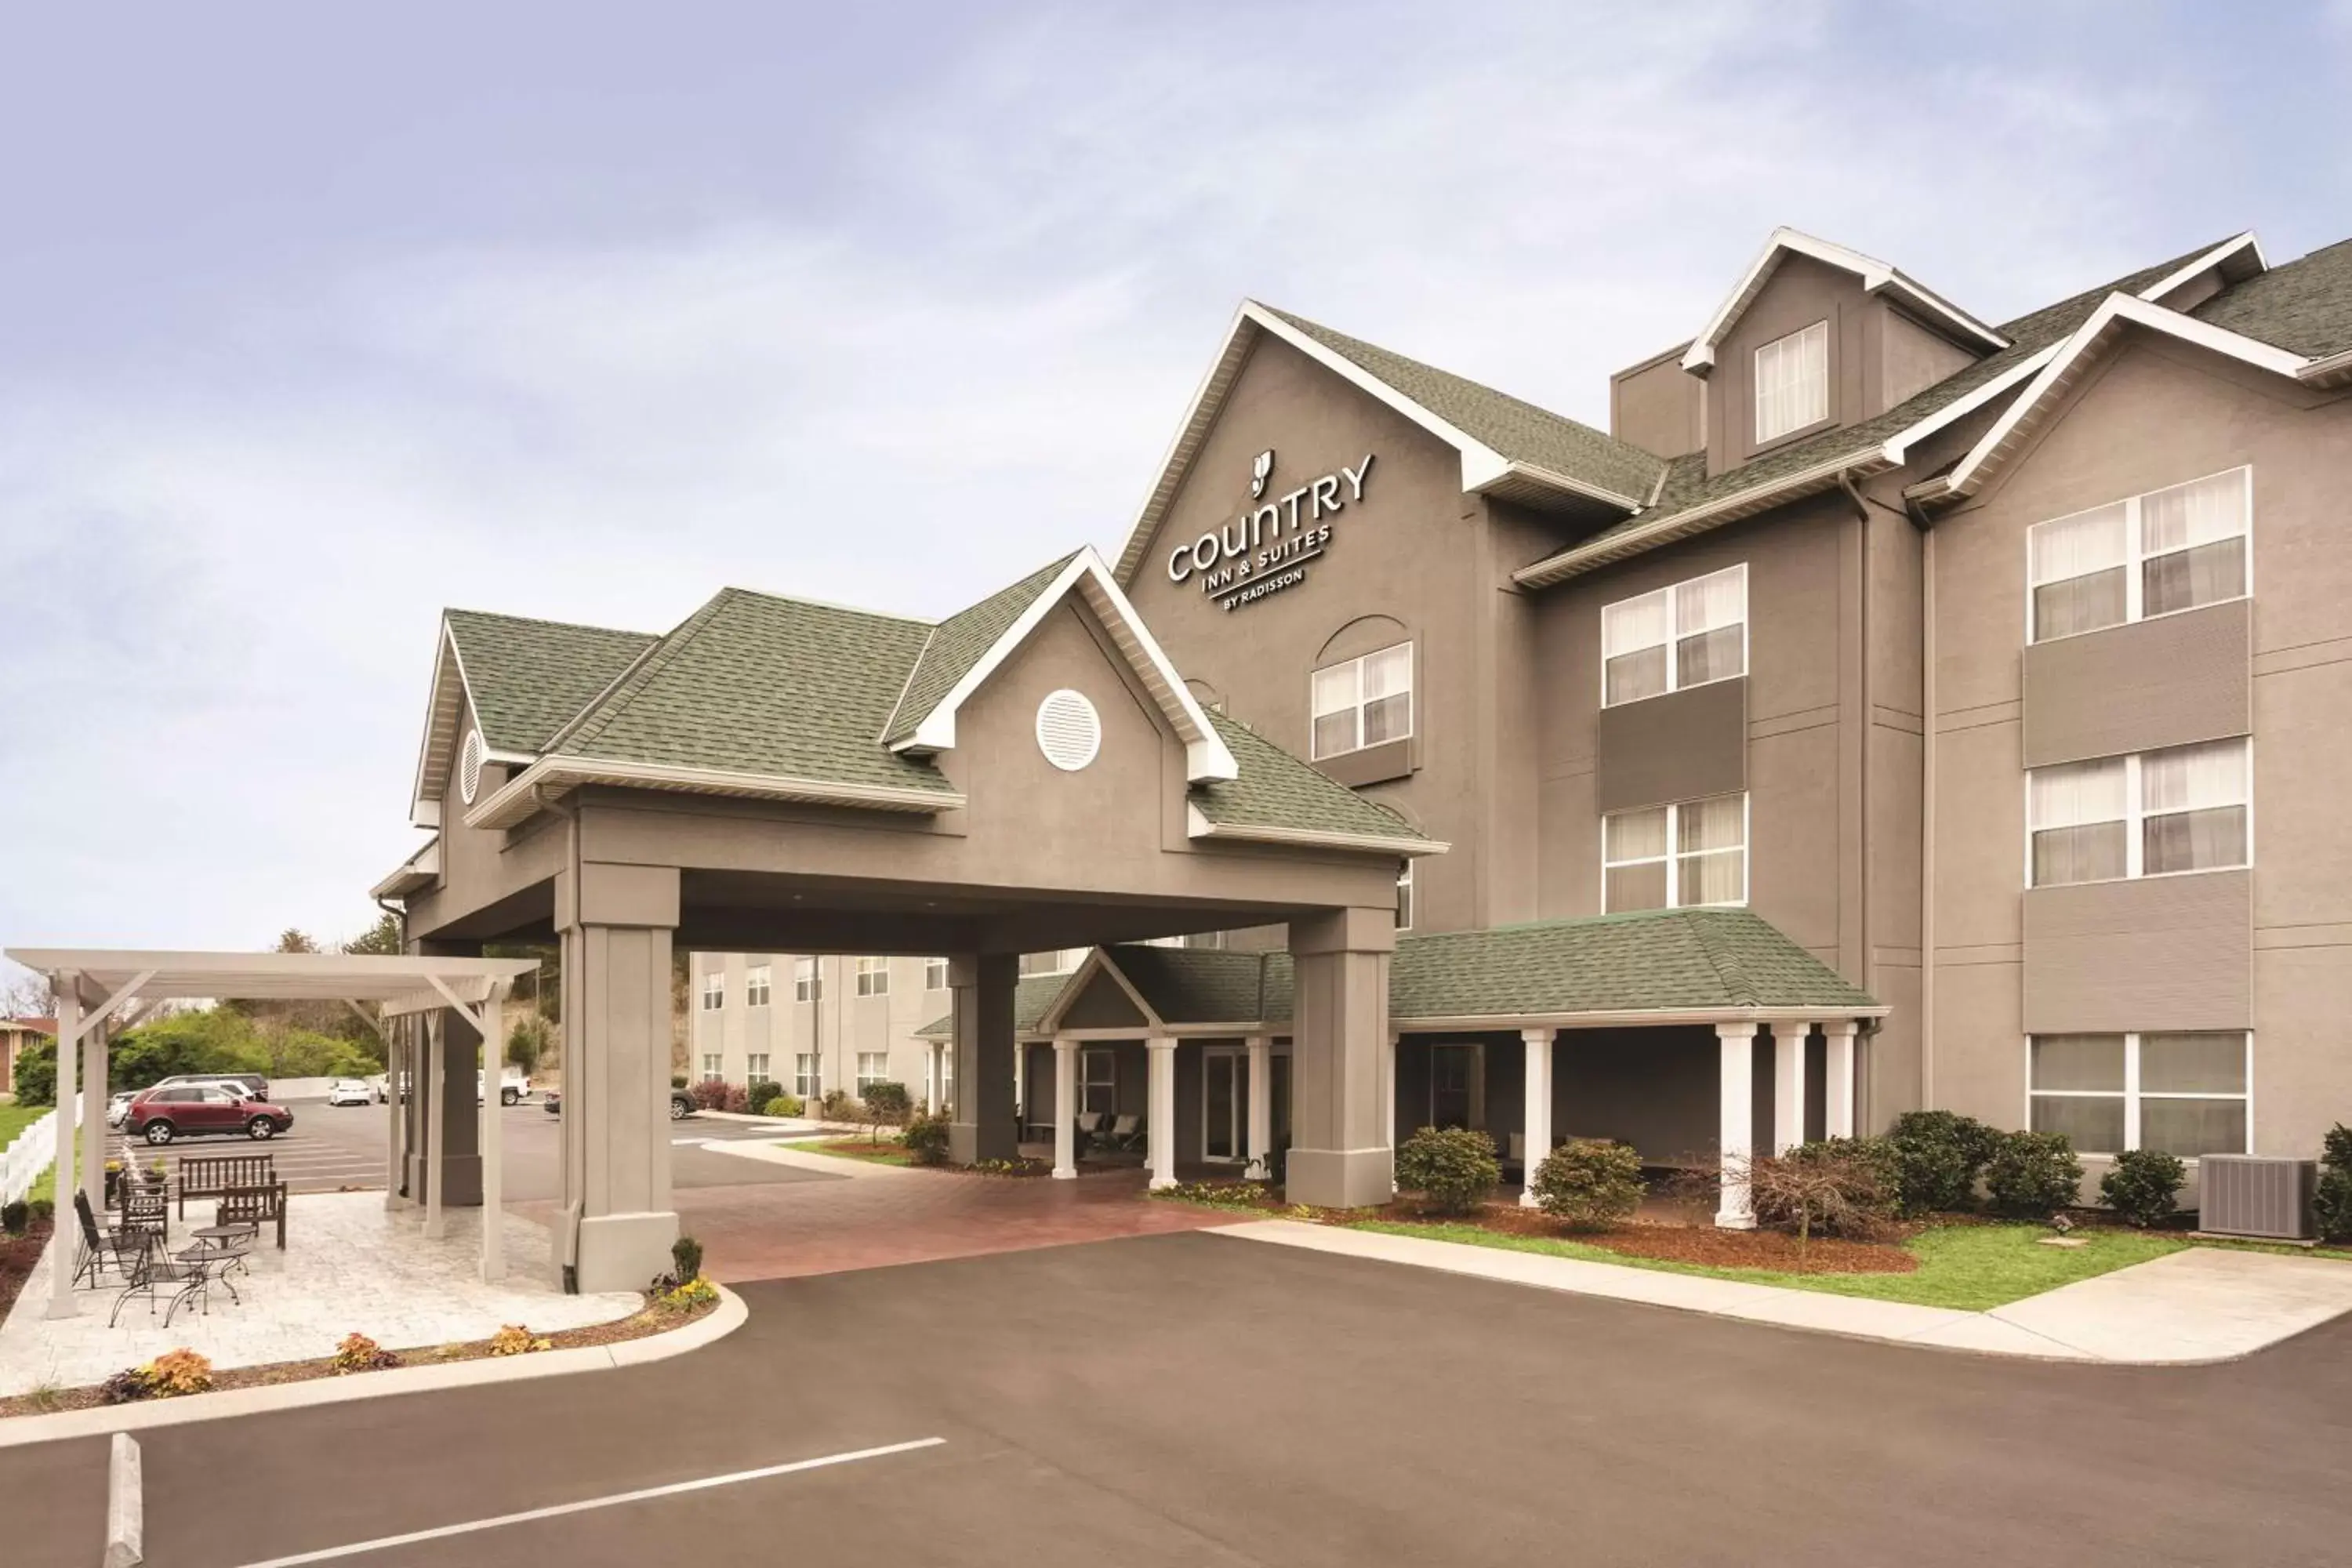 Property building in Country Inn & Suites by Radisson, Chattanooga-Lookout Mountain